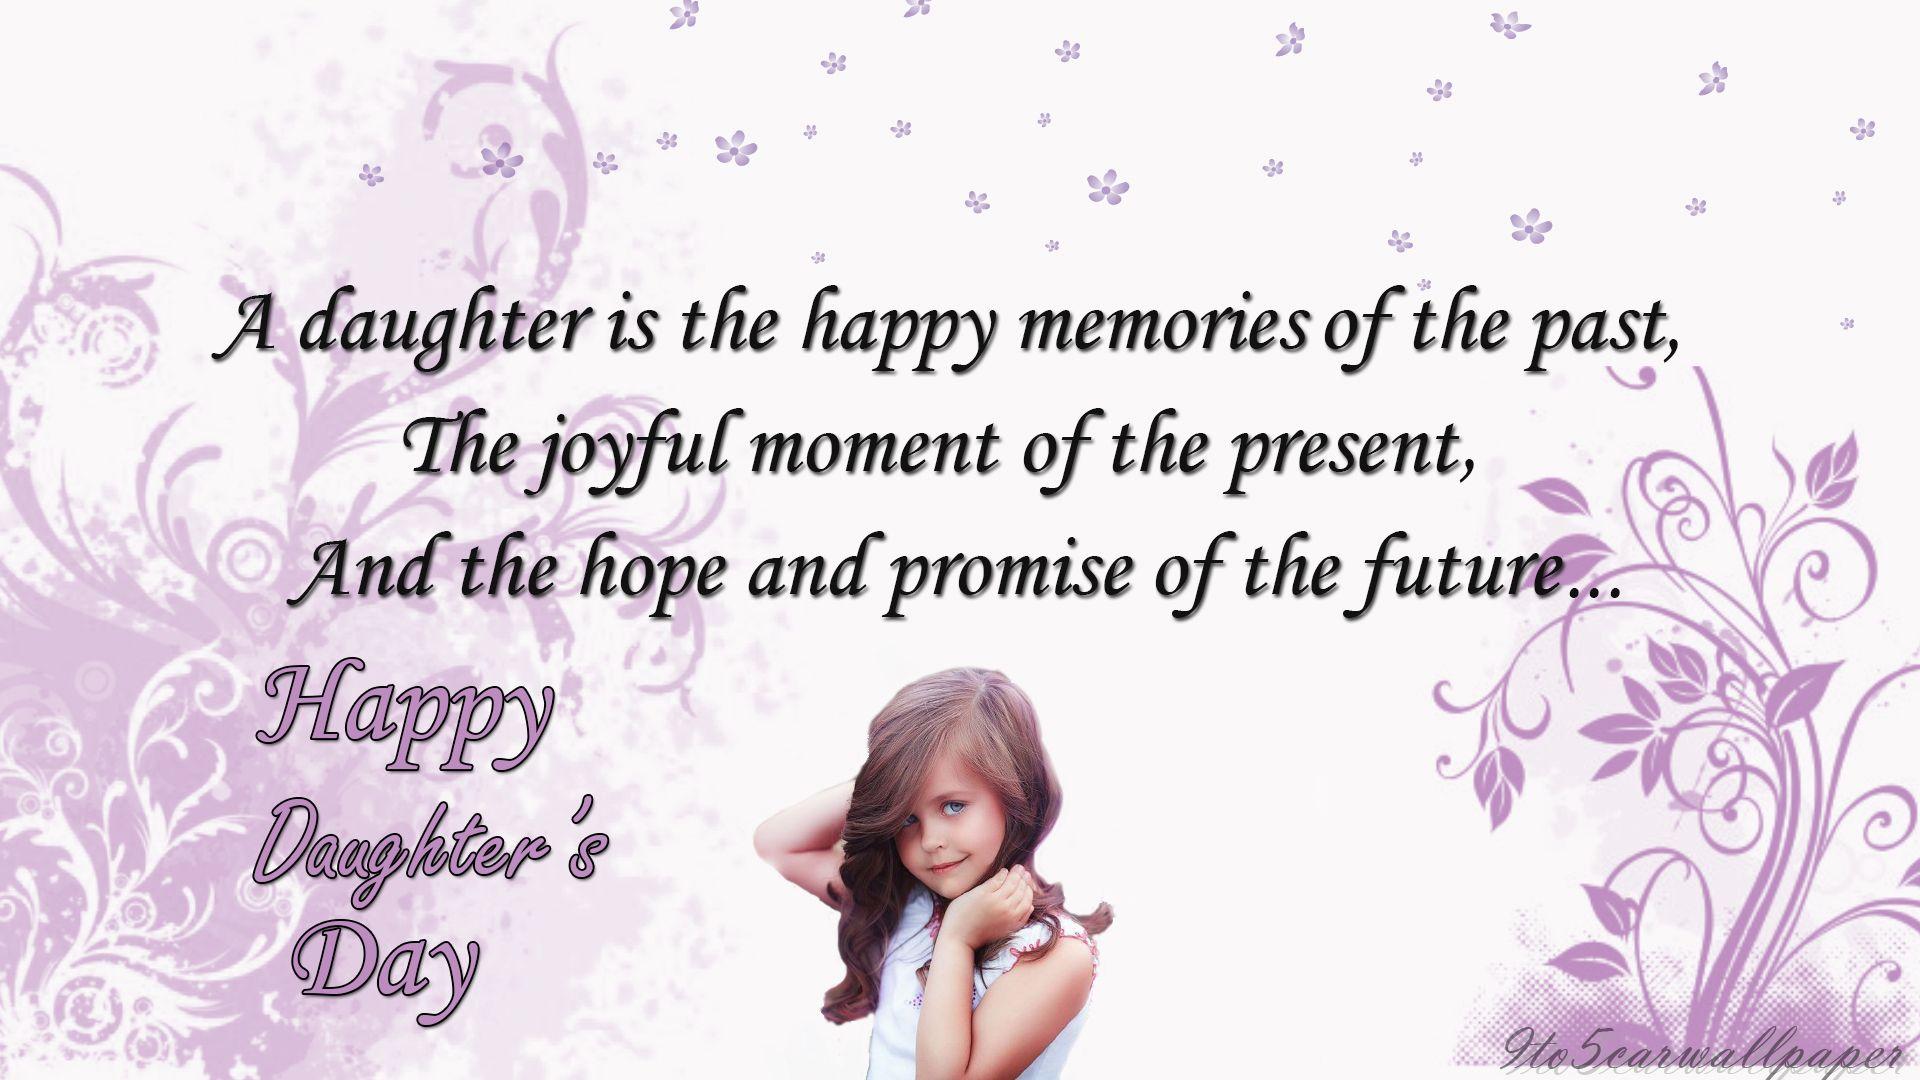 Happy Daughters Day Image Pics and Wallpaper